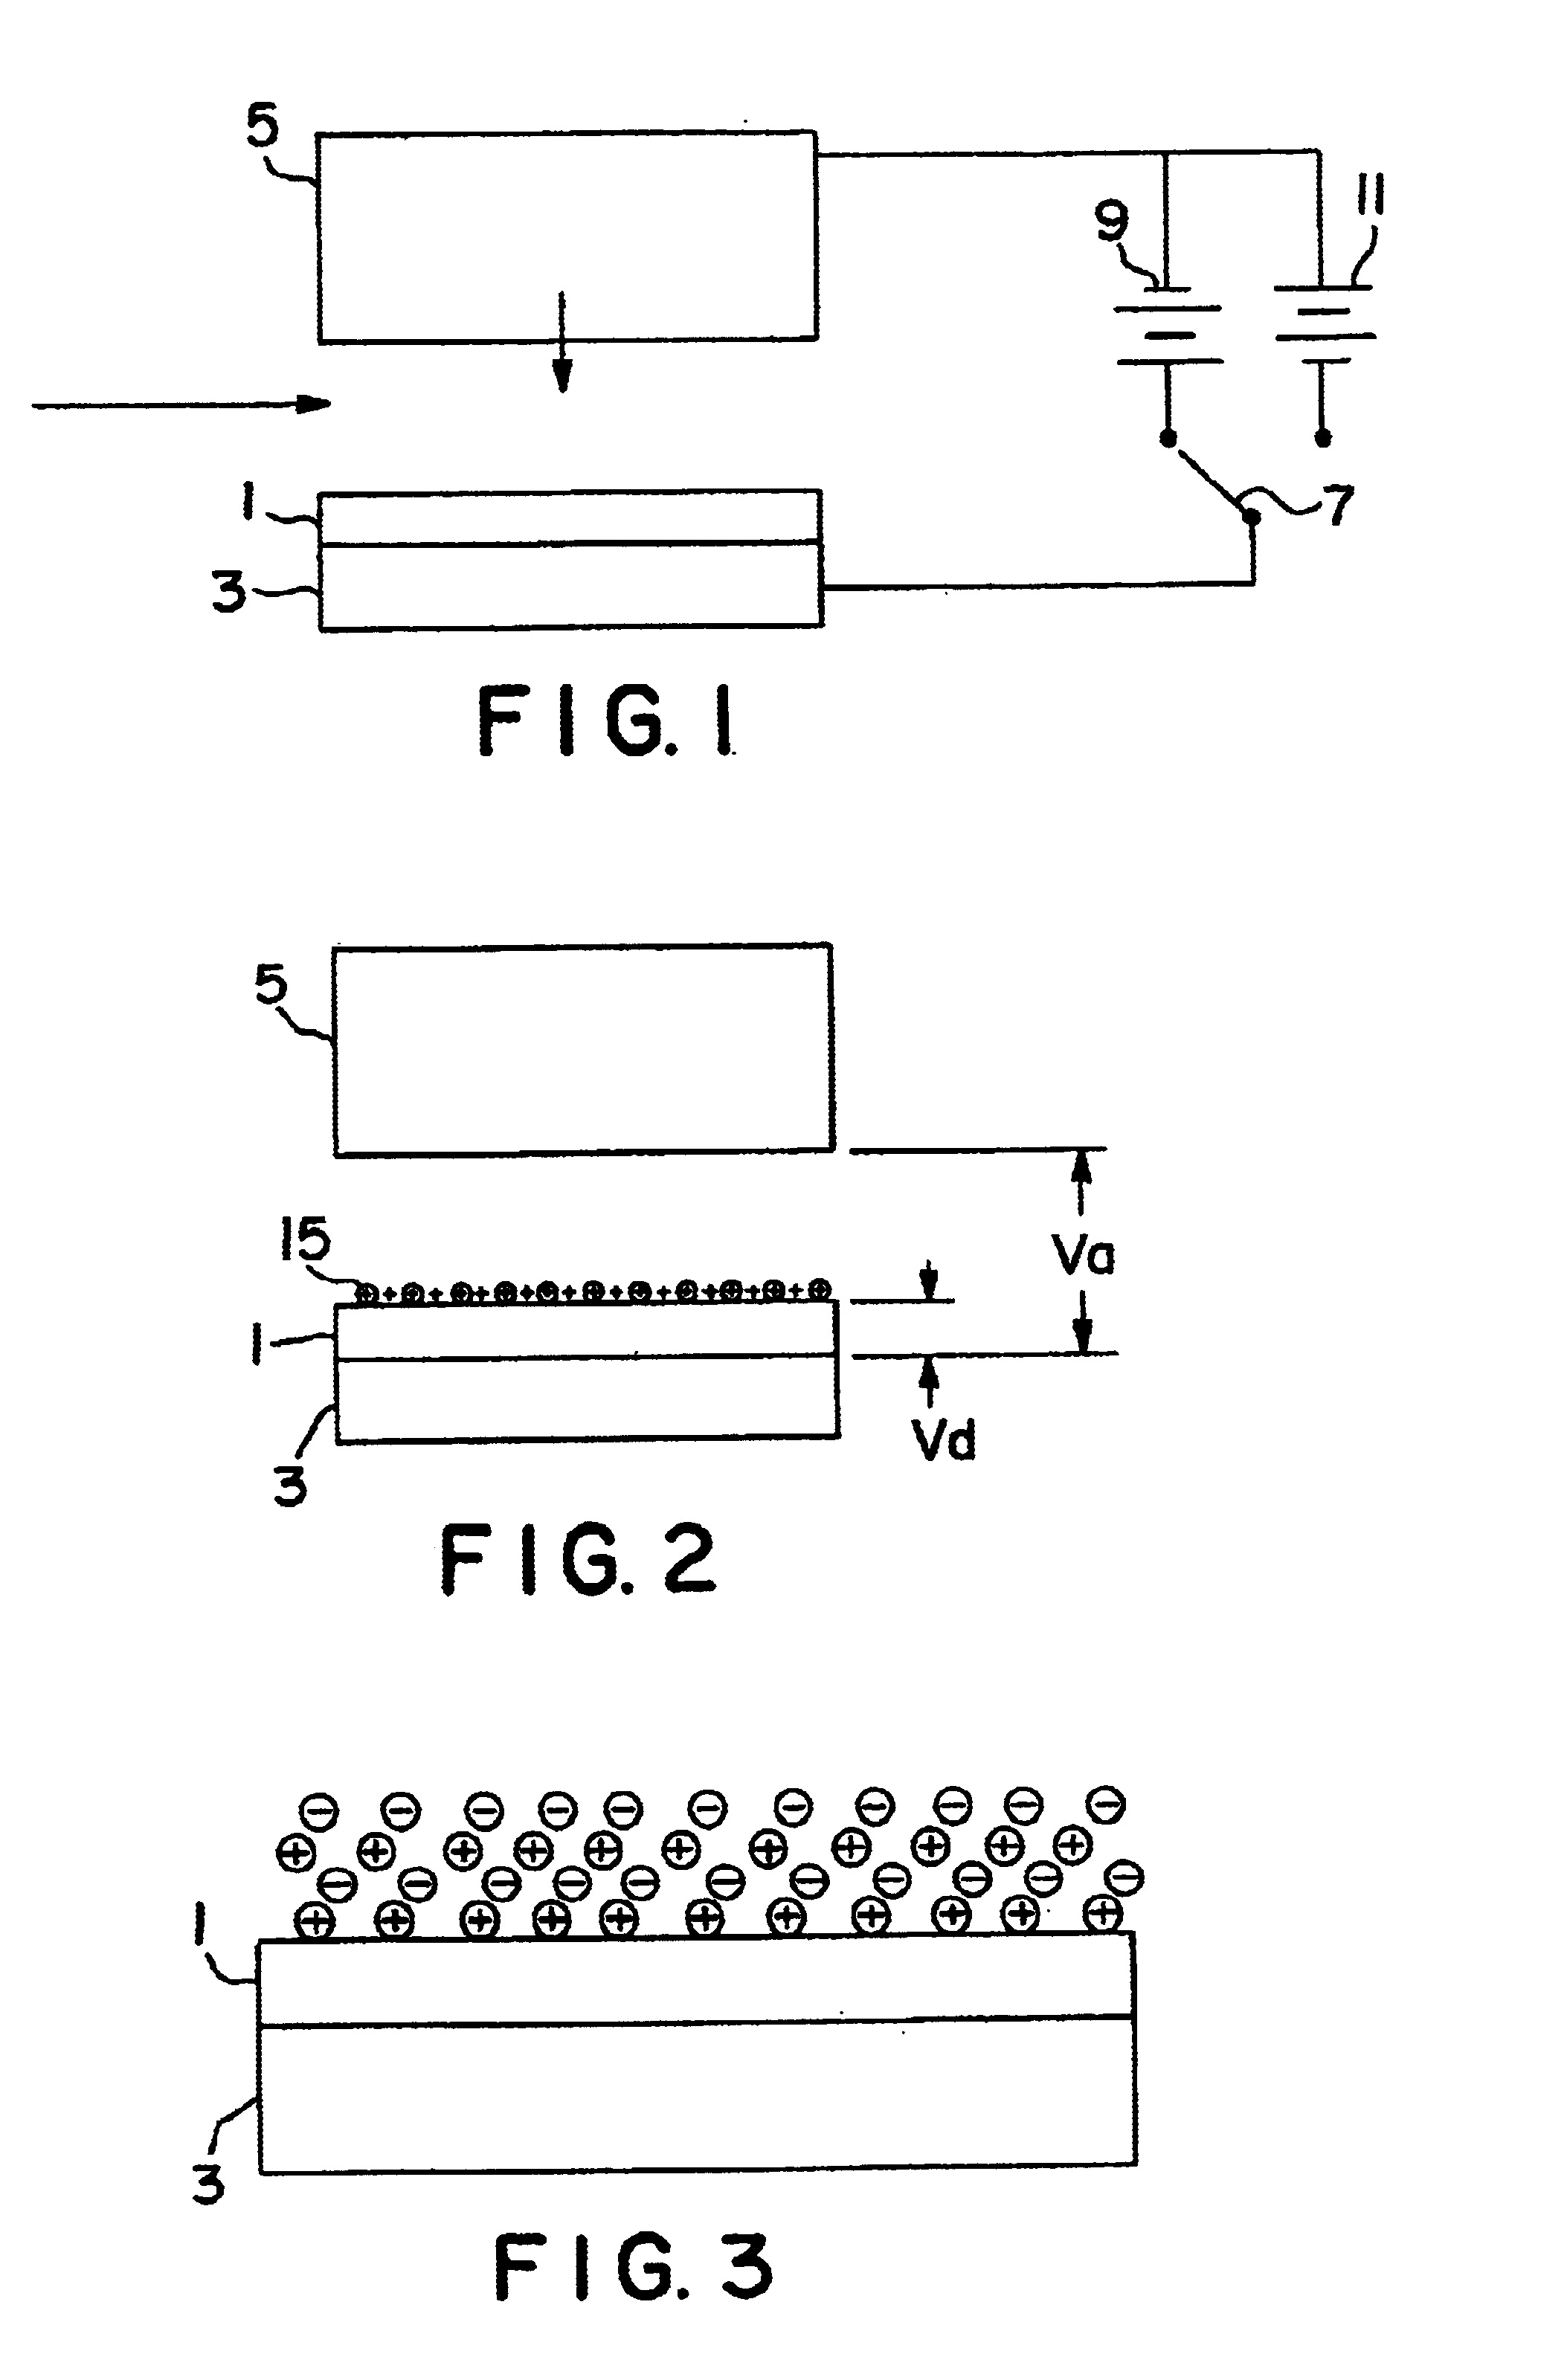 Method for depositing particles onto a substrate using an alternating electric field